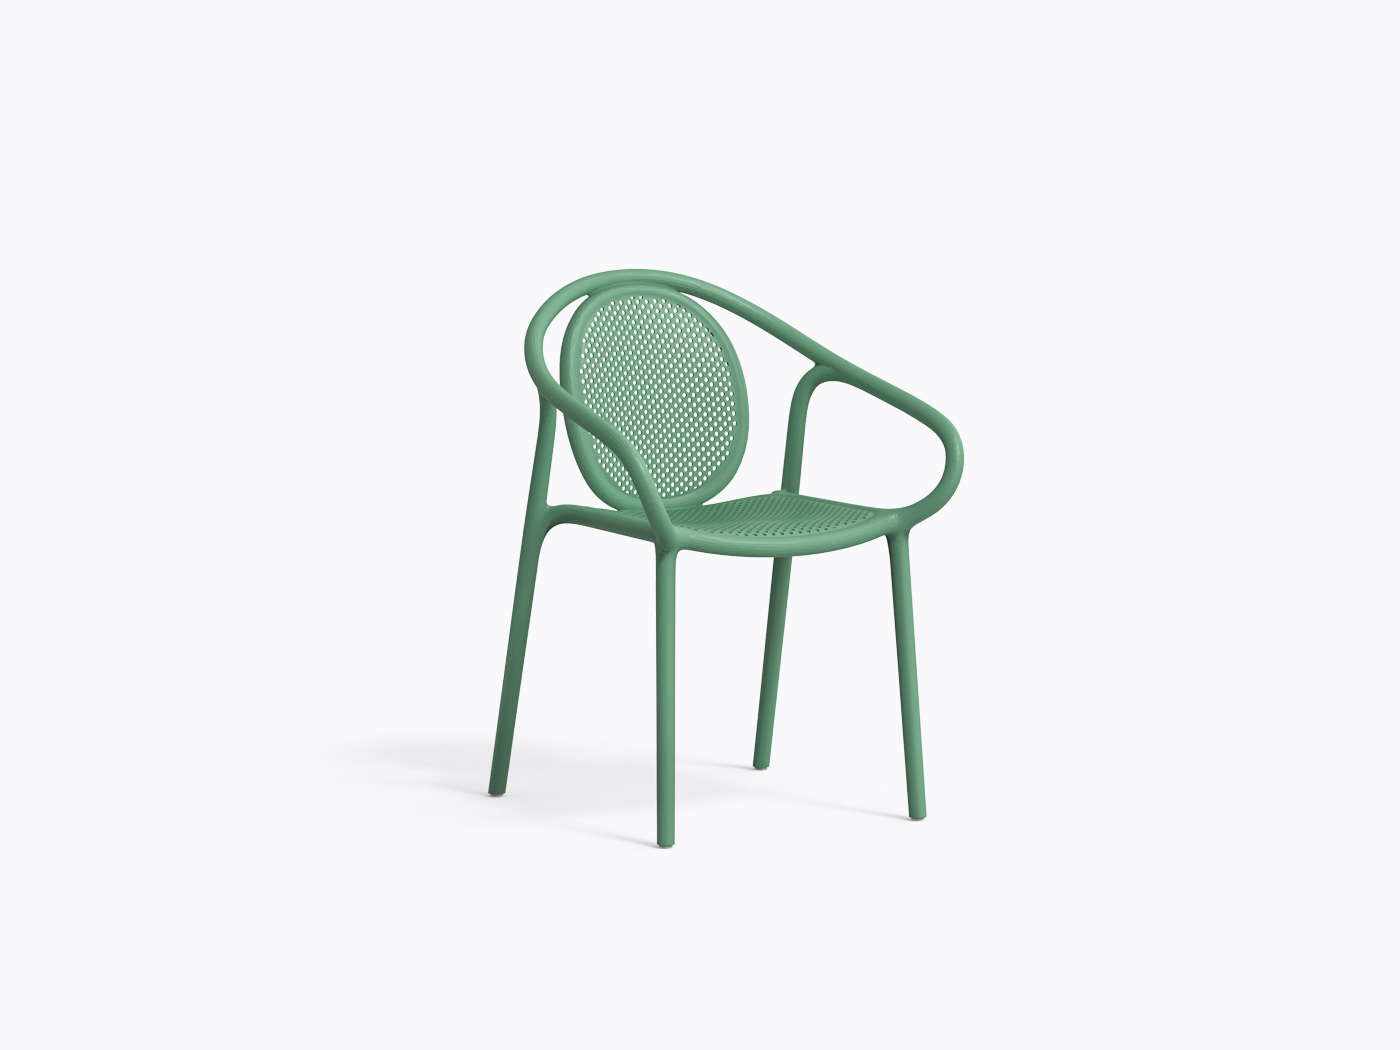 Remind 3735 Chair - Green VE